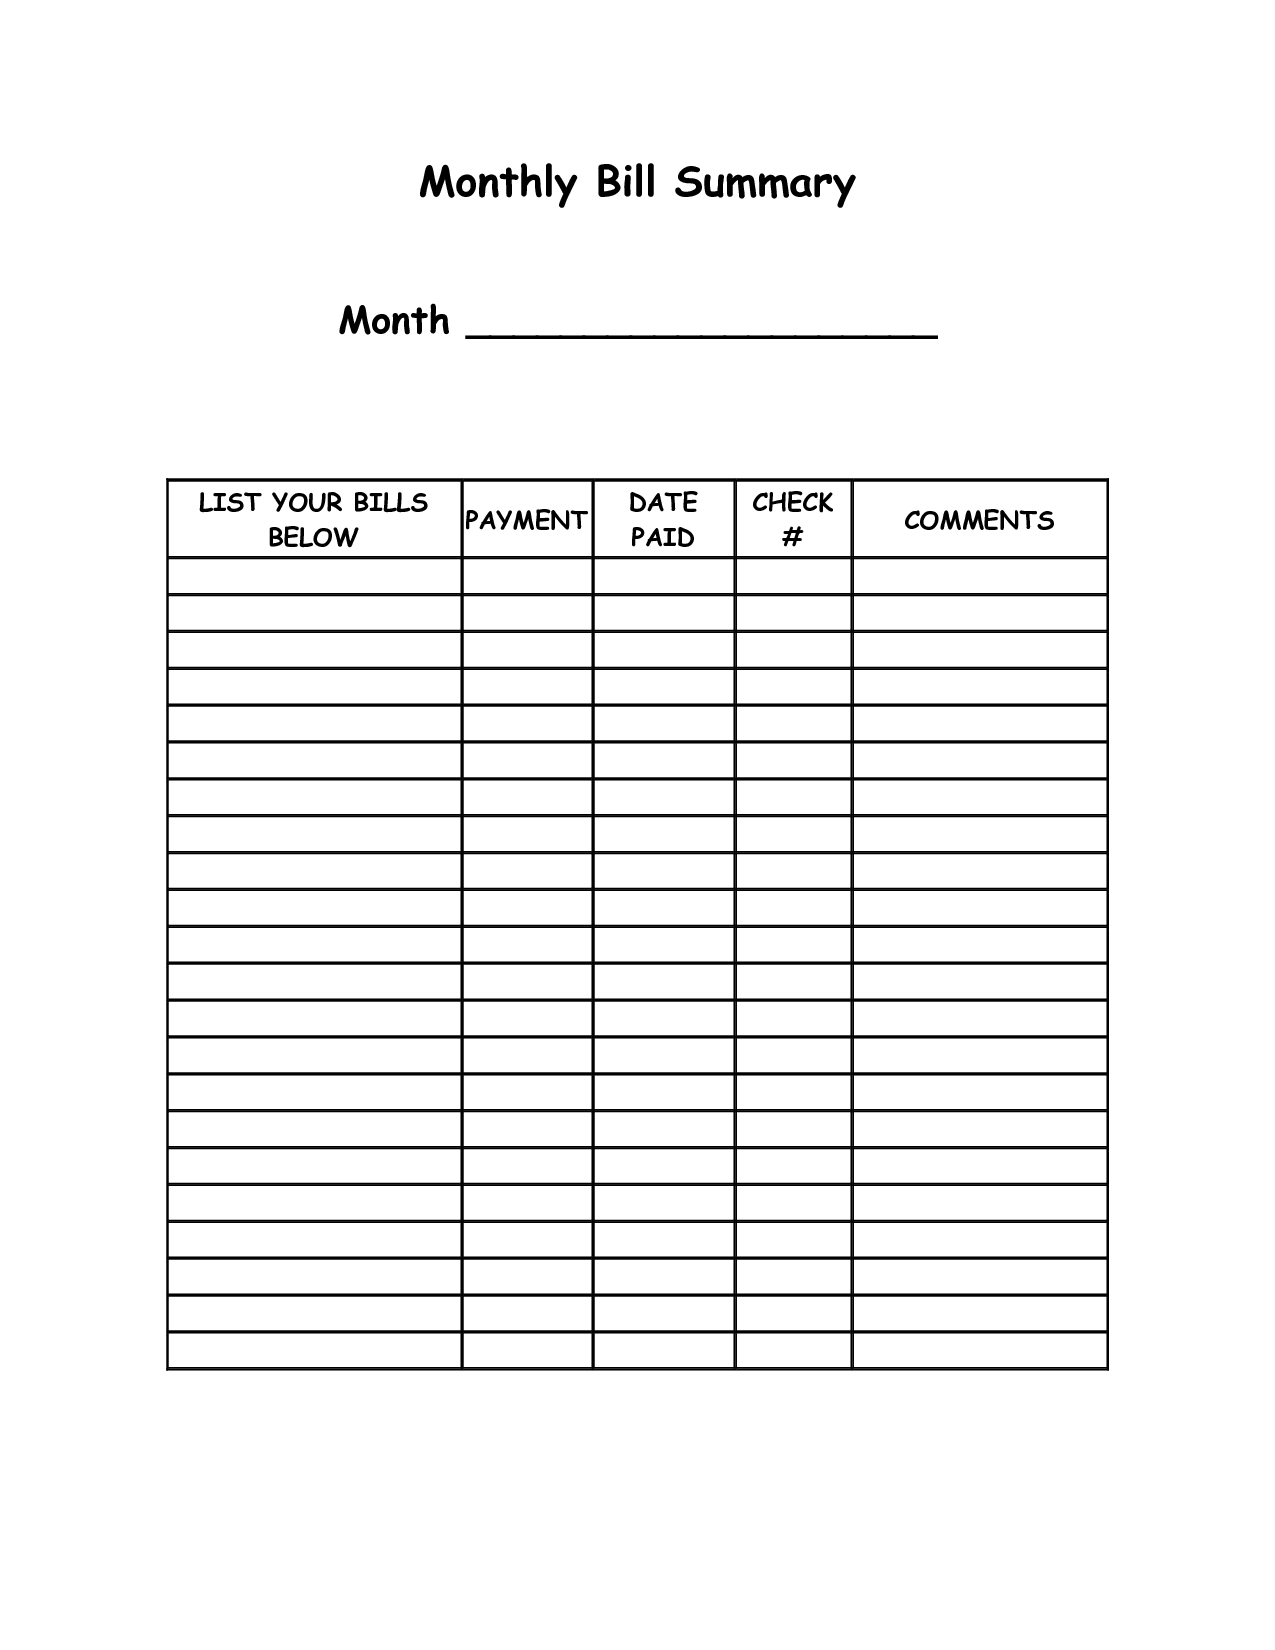 Monthly Bill Bill Checklist With Confirmation Number Column  Monthly Bill Bill Checklist With Confirmation Number Column